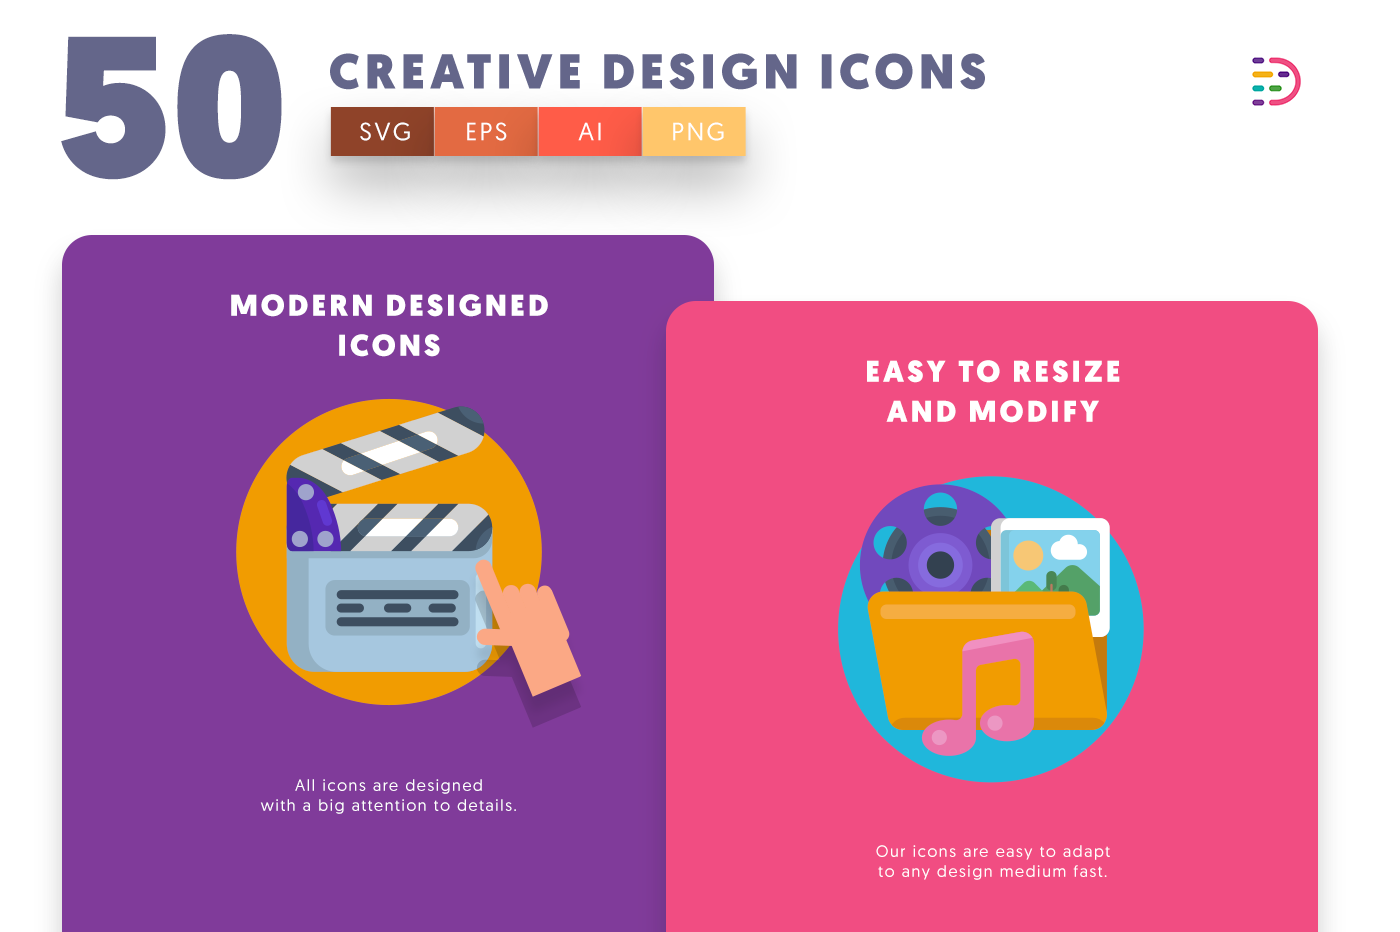 Creative Design icons png/svg/eps